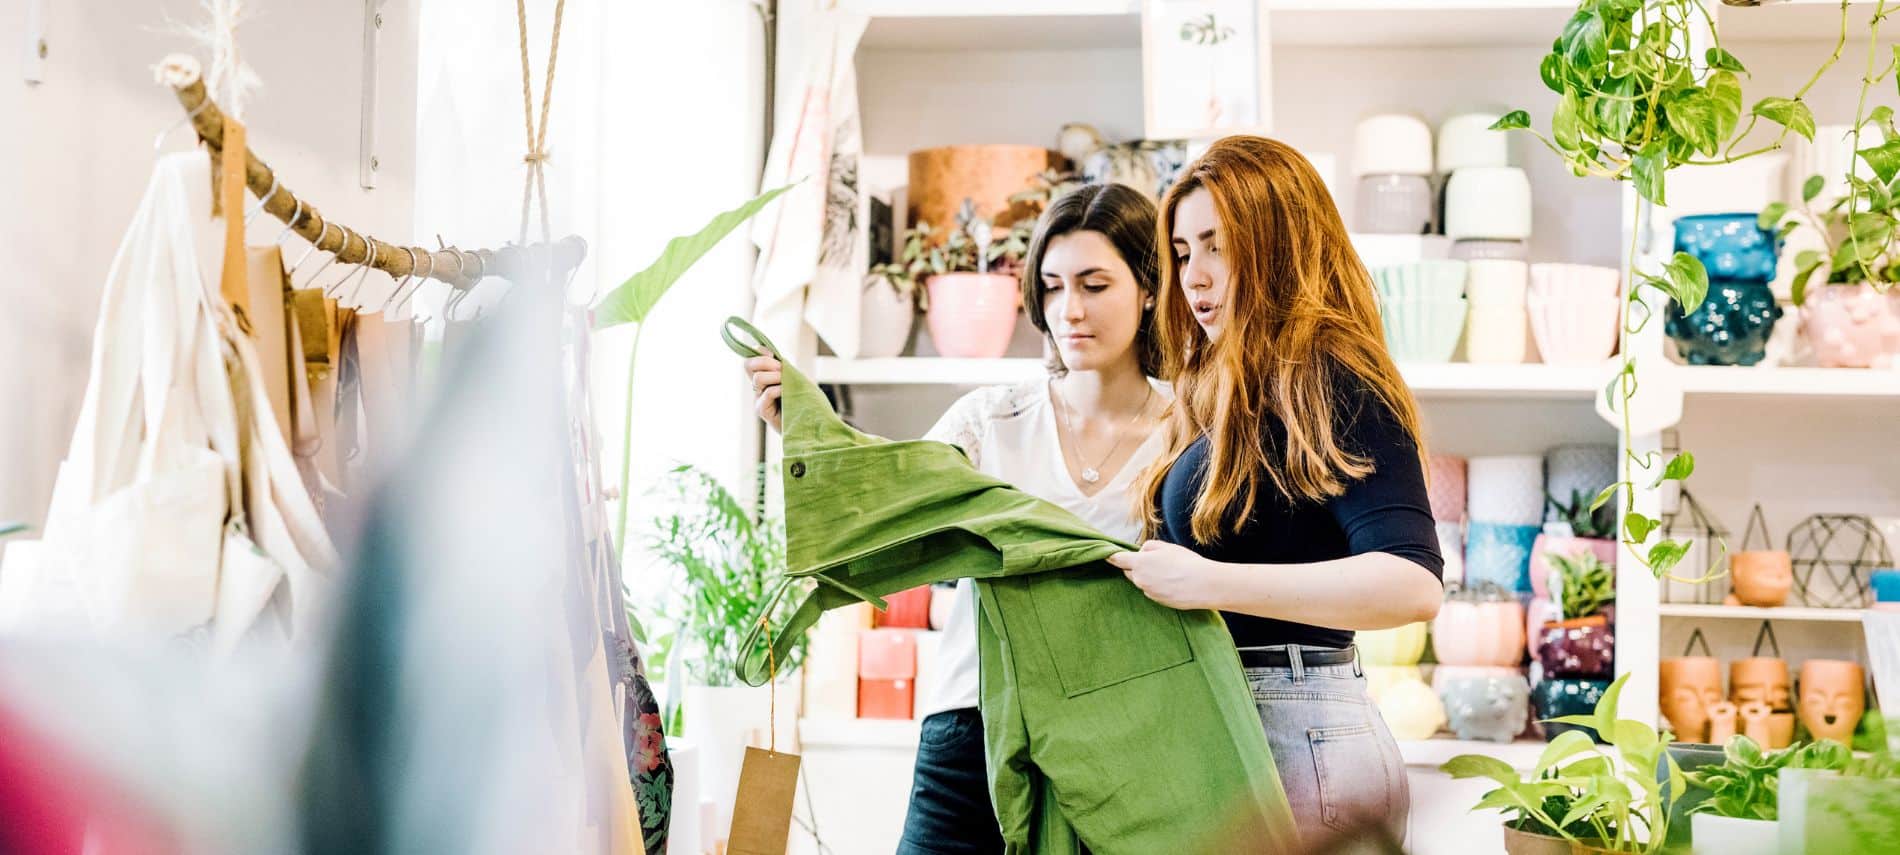 Two women are shopping in a fun boutique store that has plants